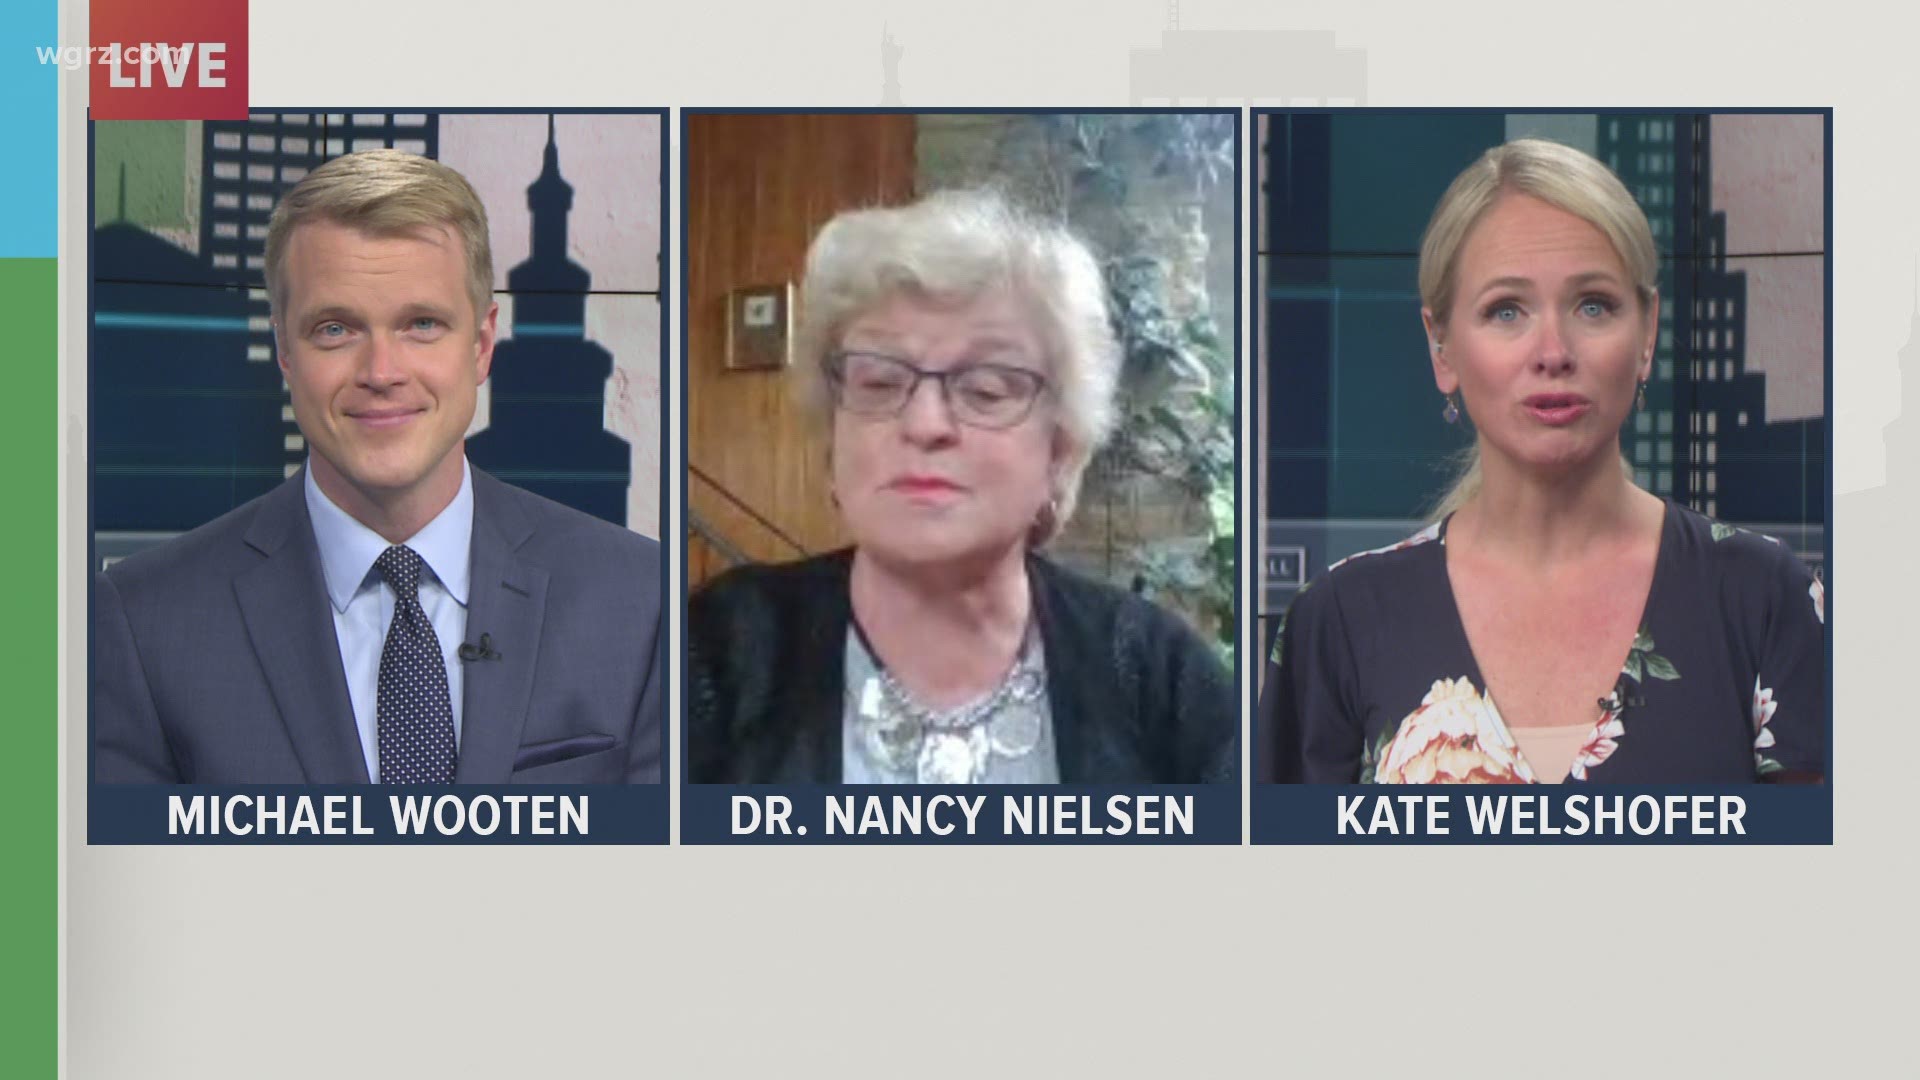 Dr. Nancy Nielsen, senior associate dean for health policy at UB's medical school, joins our Town Hall to discuss lifting COVID-19 restrictions.